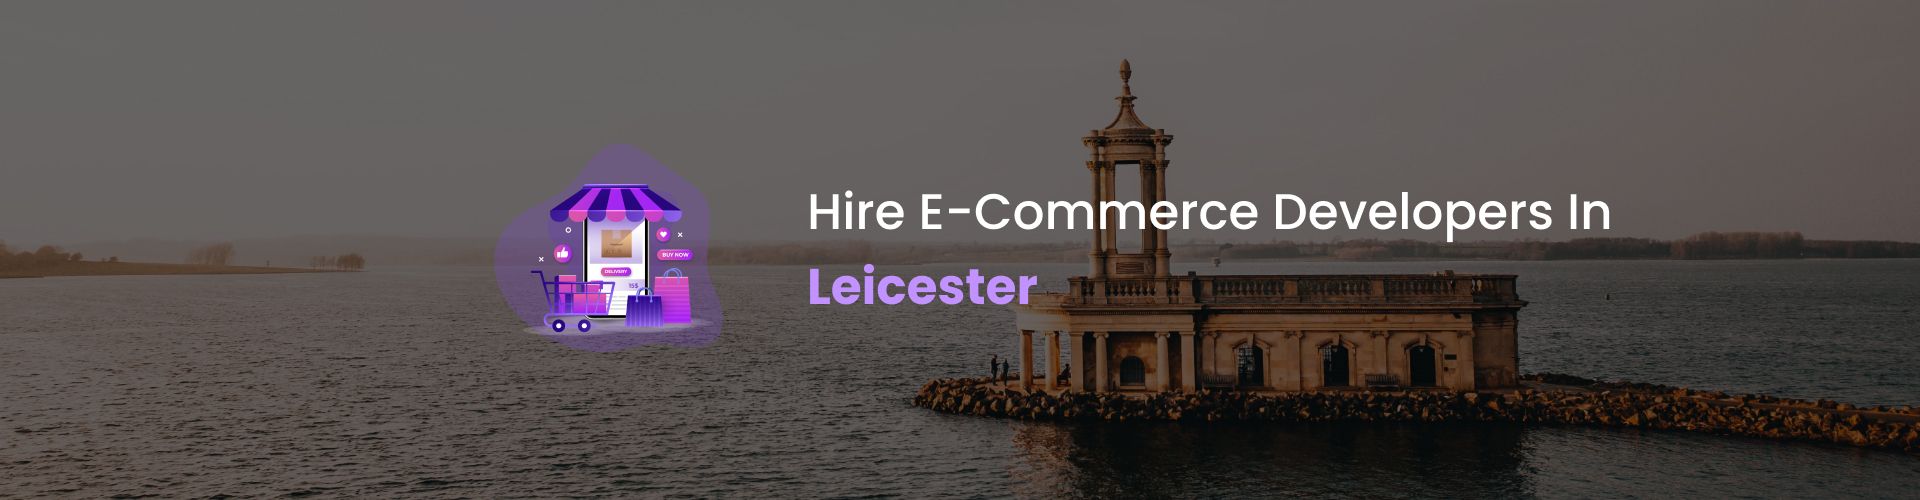 hire ecommerce developers in leicester